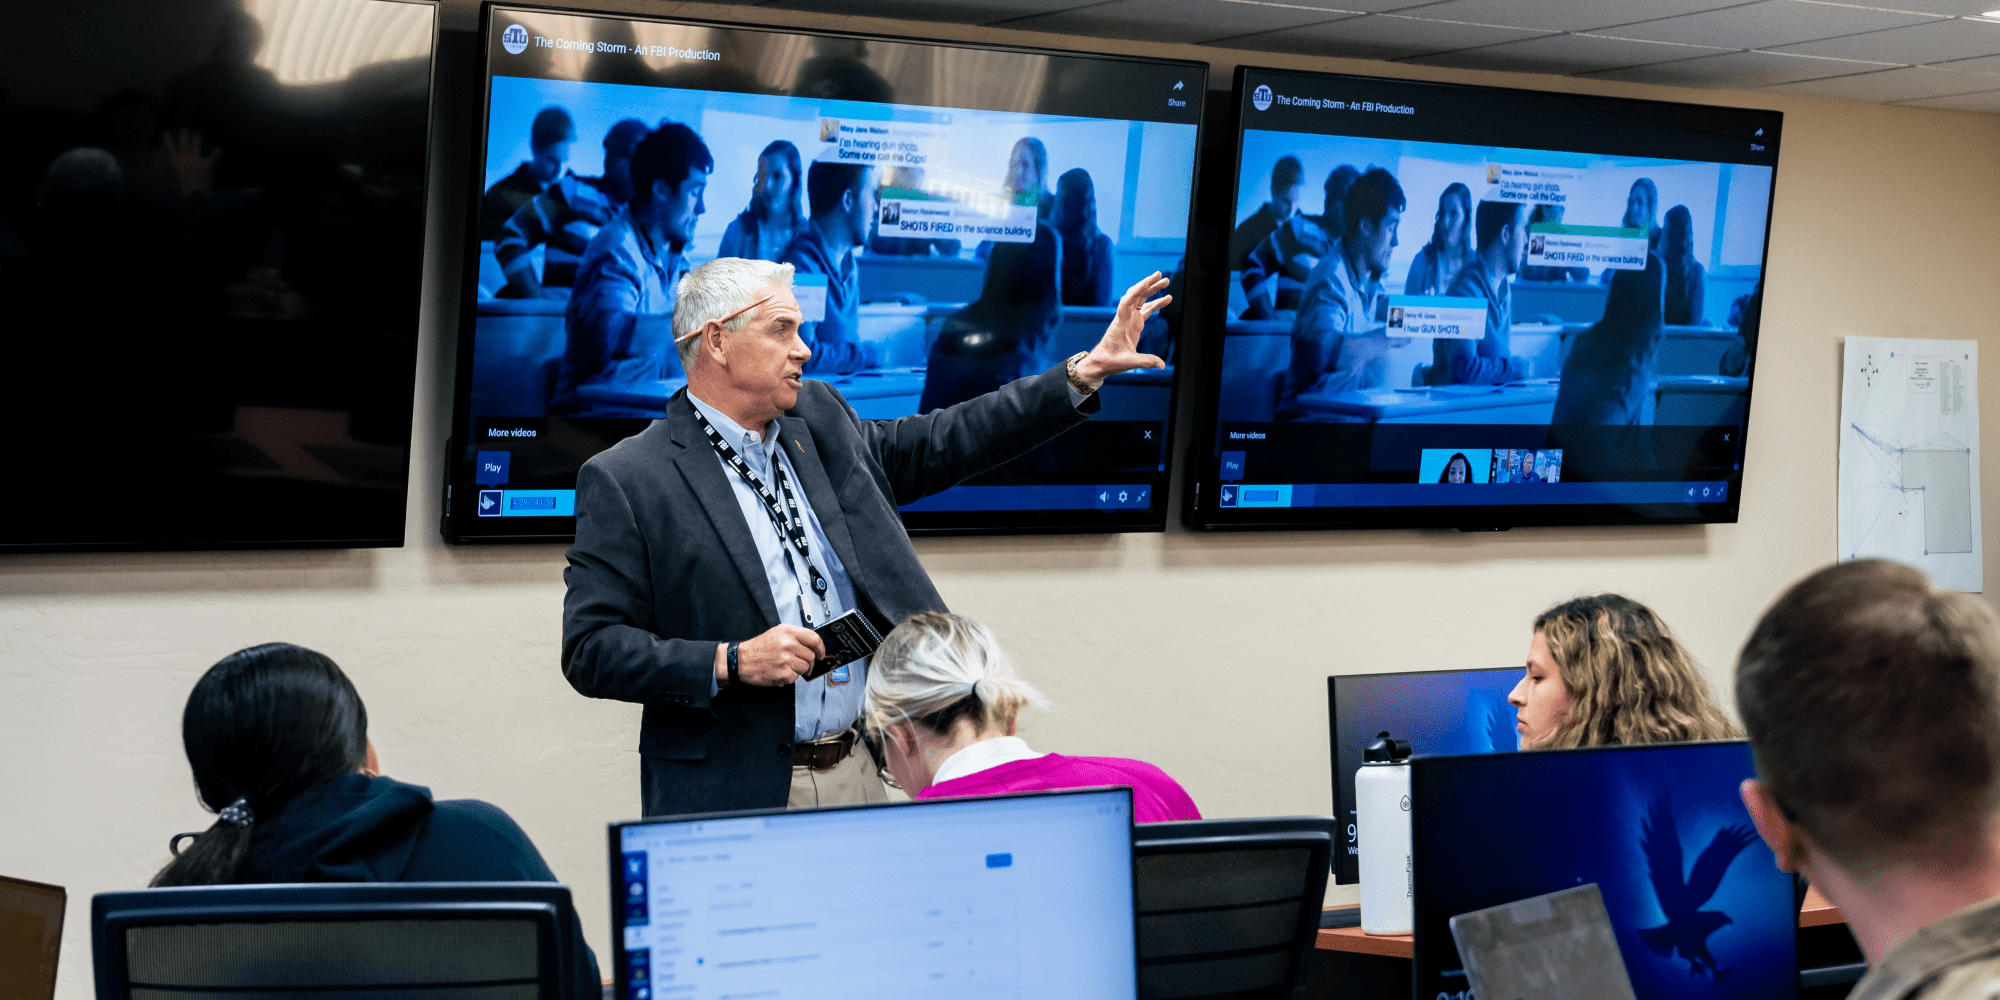 Professor Hooper, a white man with silver hair wearing a suit coat over a button down shirt open at the neck, gestures in front of a classroom. A zoom meeting is displayed on two large monitors behind him.